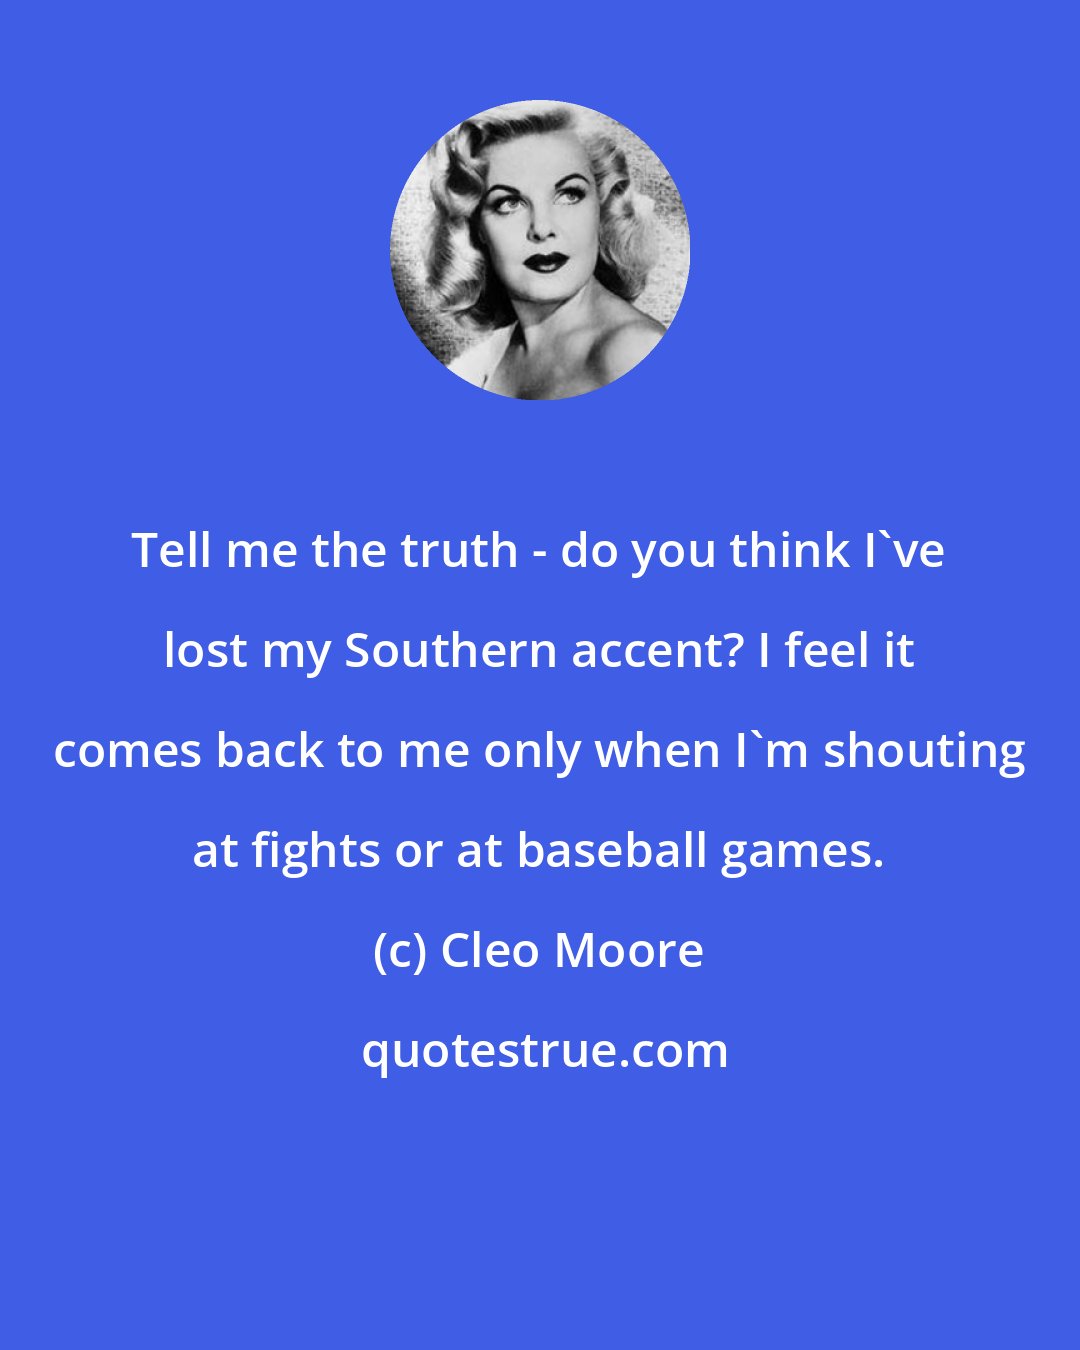 Cleo Moore: Tell me the truth - do you think I've lost my Southern accent? I feel it comes back to me only when I'm shouting at fights or at baseball games.